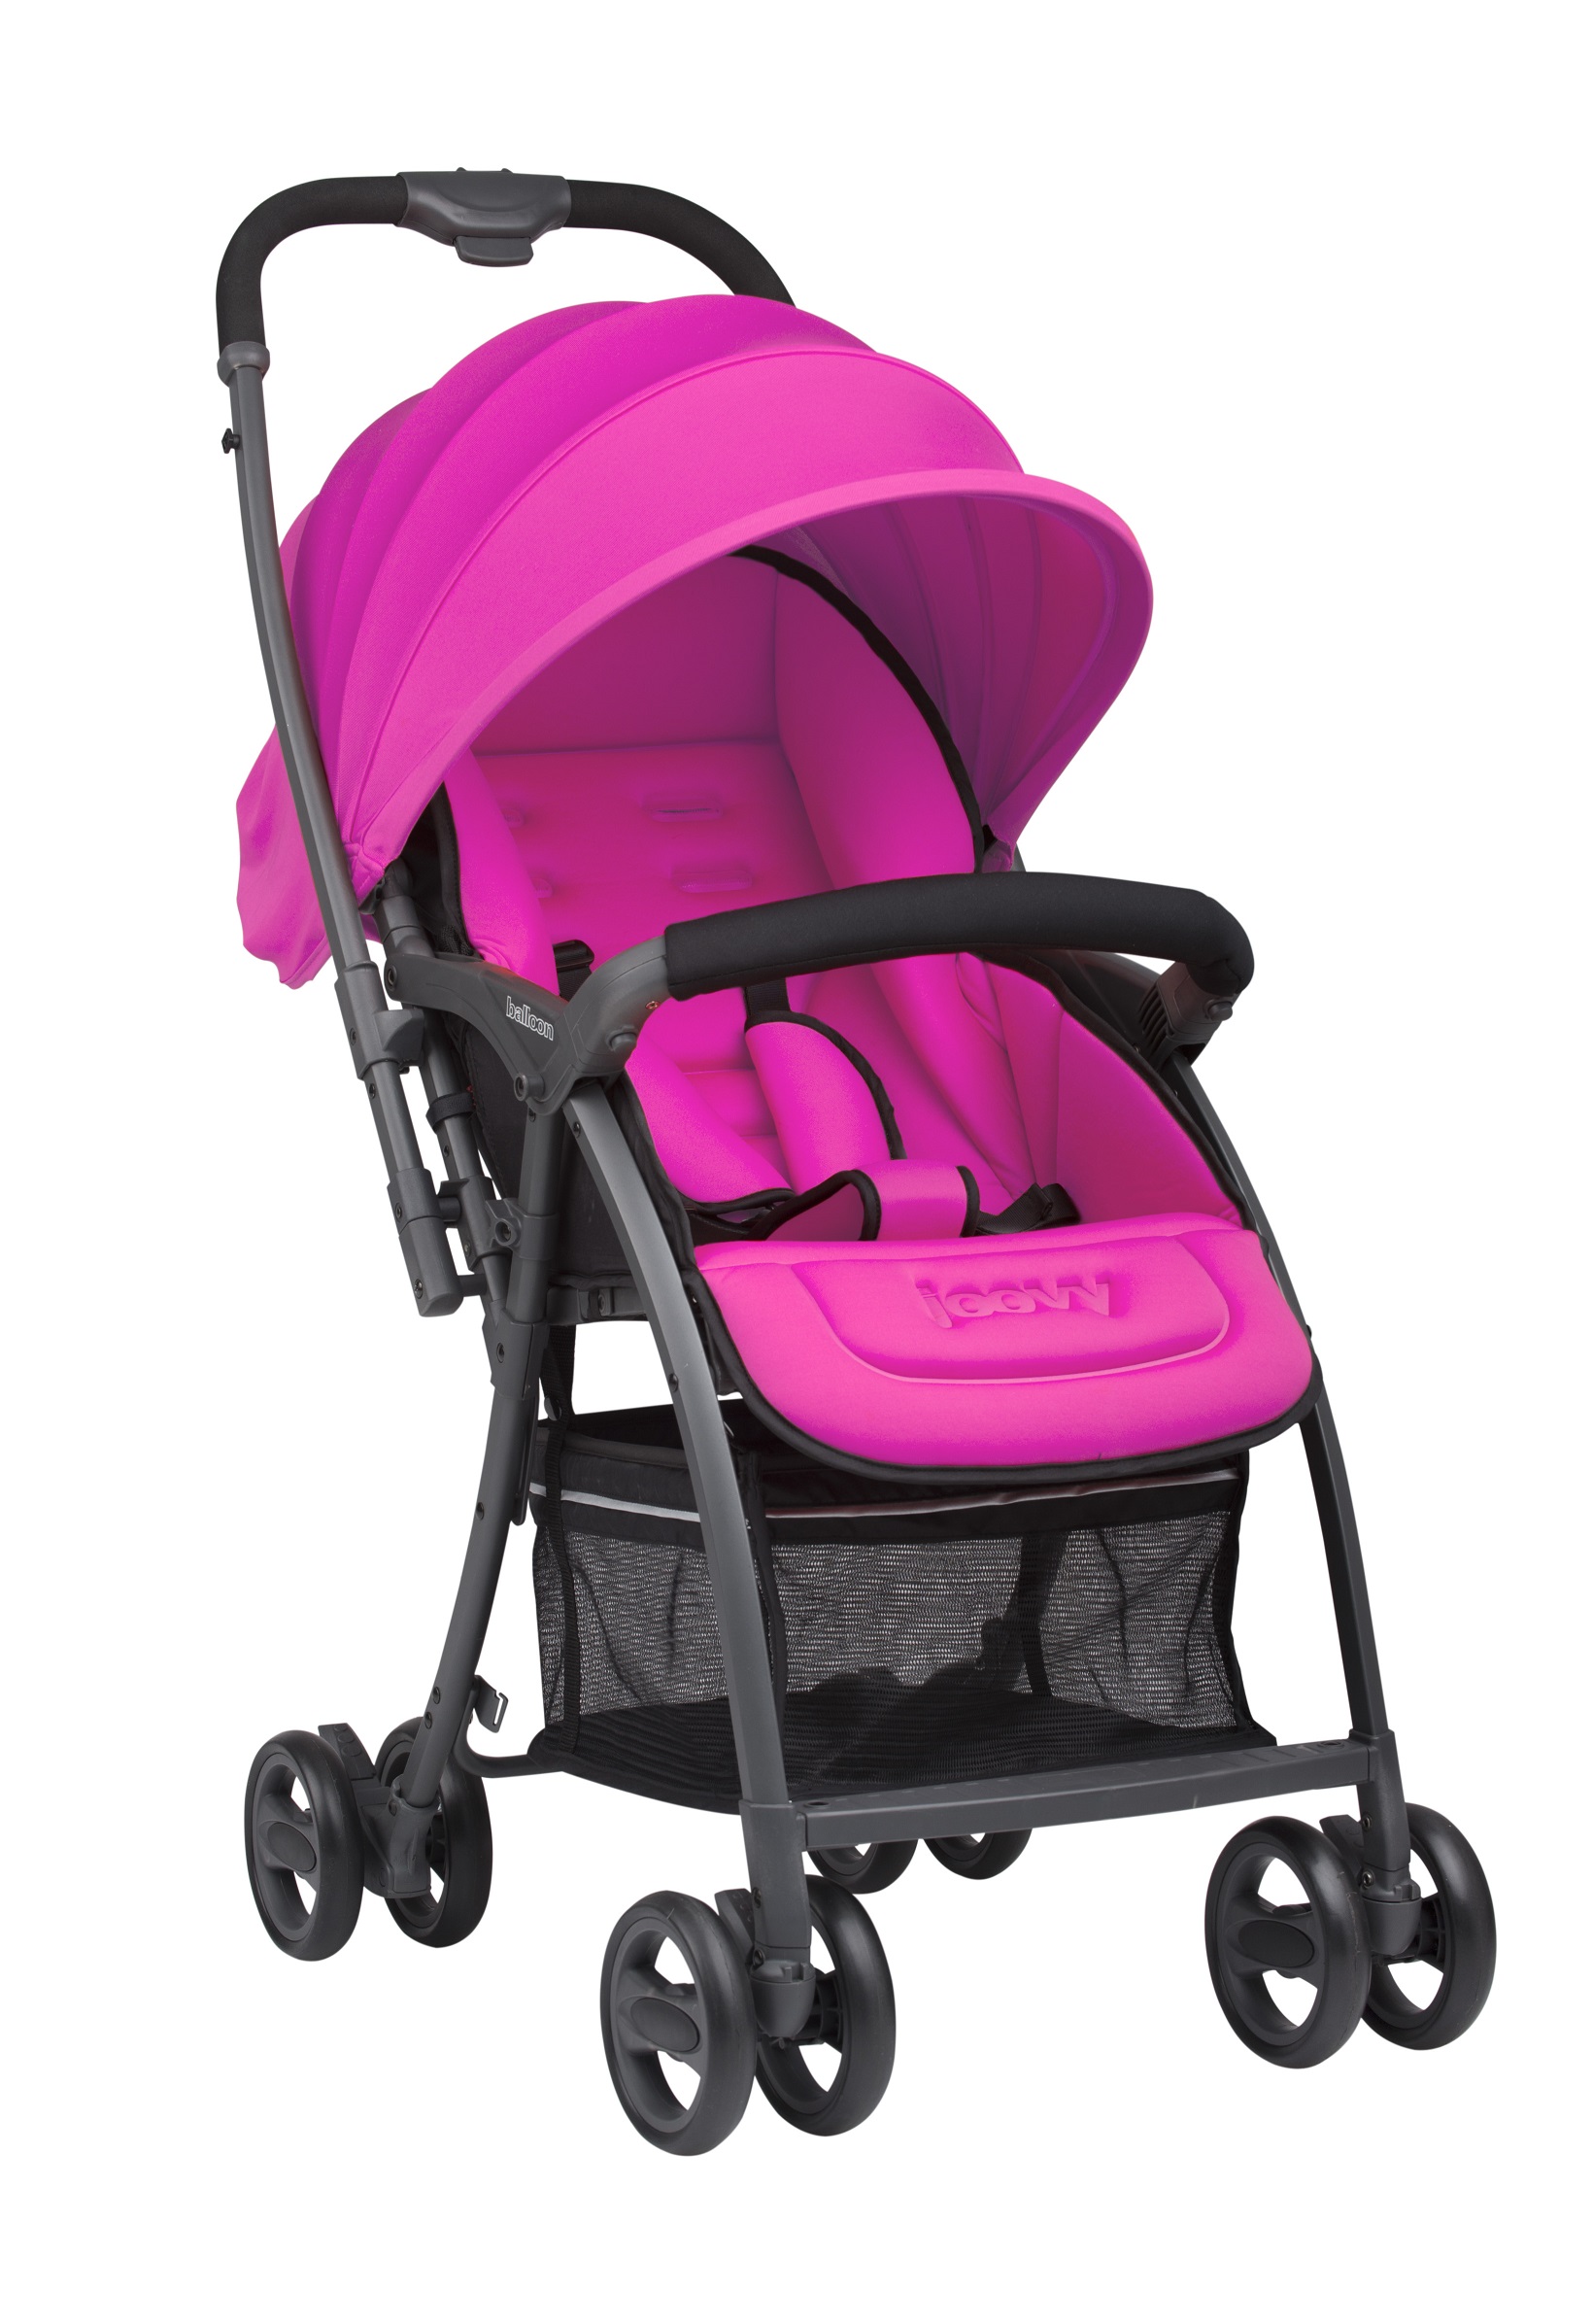 #StrollGoals: Our Guide To The Best Strollers Of 2015 – New York Family